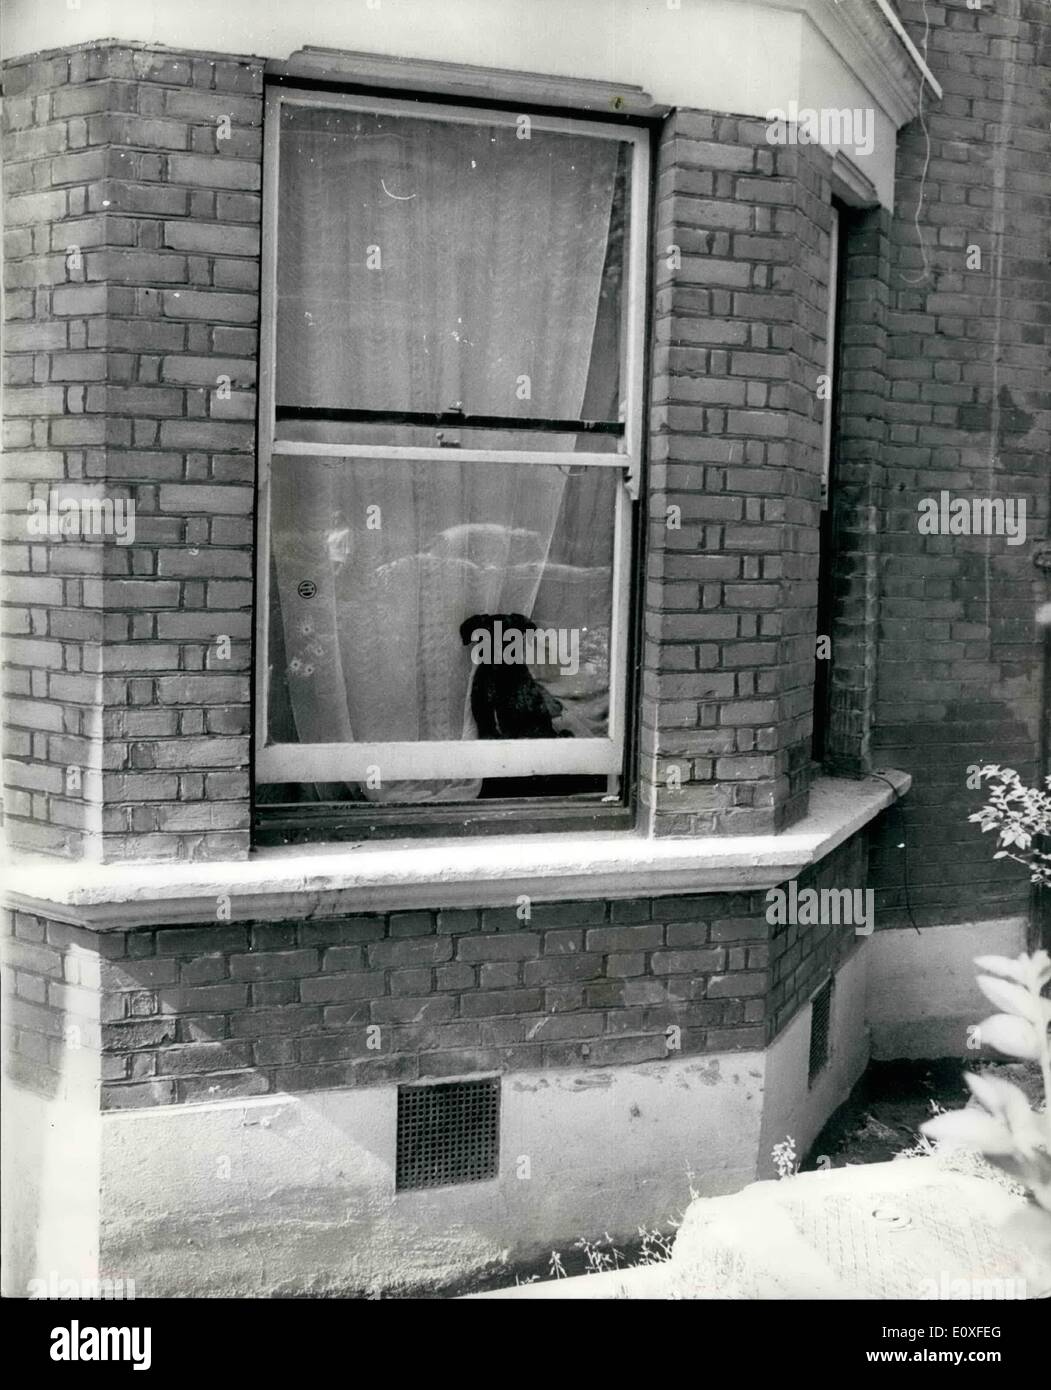 Aug. 08, 1966 - The Dog Waiting For Roberts To Came Back: The dog sitting in the widow of a ground-floor flat in Maida Vale London, is called Johnny. His owner, who is said to be very found of Johnny, left the house eight days ago and has not been back since. His name is Harry Roberts. Police who seen hunting Roberts since the shooting of three policeman in Shepherd's Rush 10 days ago, have already interviewed the woman who lives in flat 30-yeas-old Mrs. June Howard. She told them that Roberts and a woman friend, Mrs. Lilly Perry stayed there for 10 weeks before the shooting. Yesterday Mrs Stock Photo